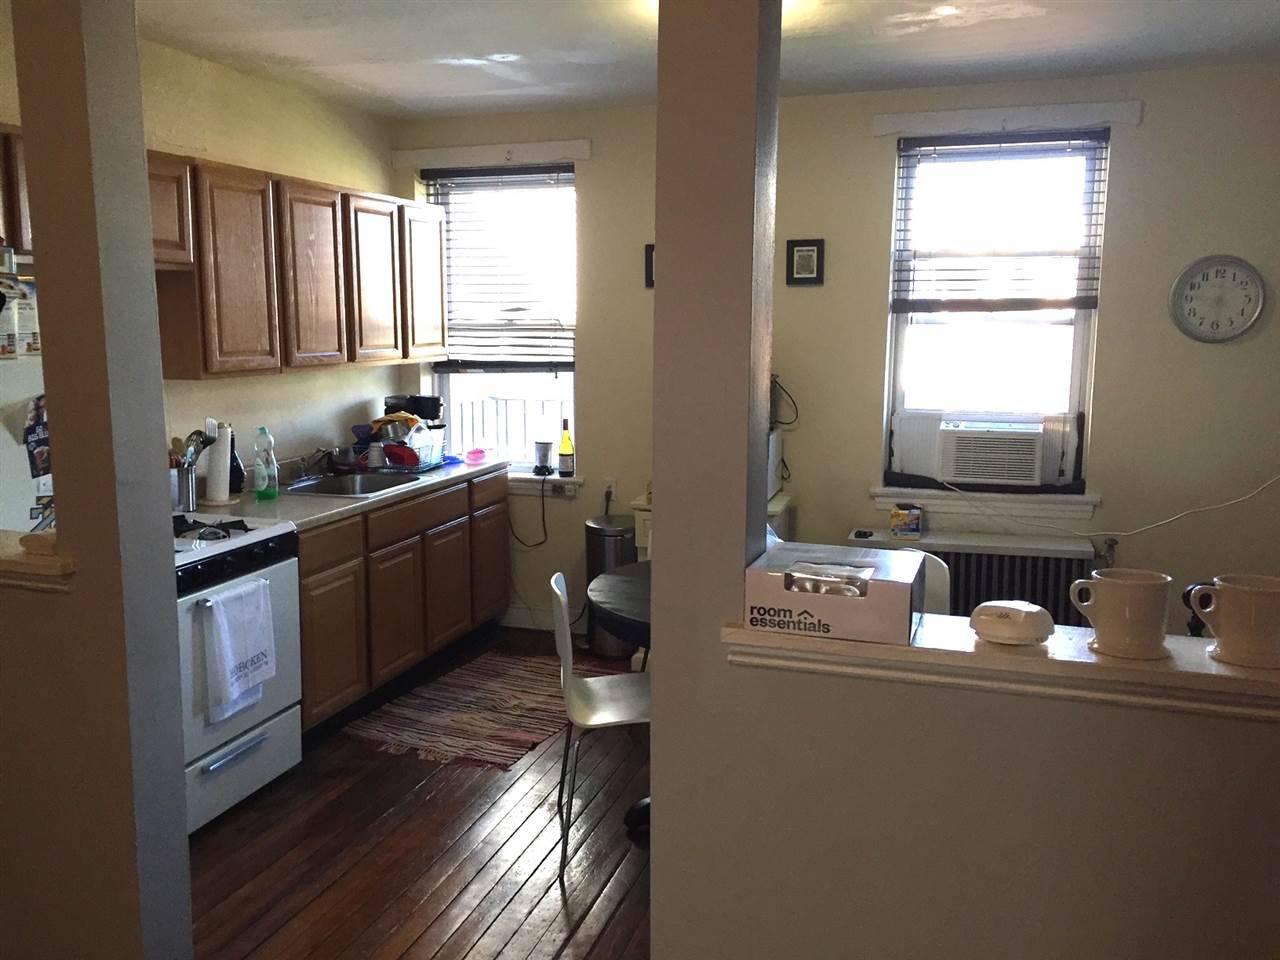 Downtown Hoboken large 2 bedroom-1 bath plus den on 1st and willow